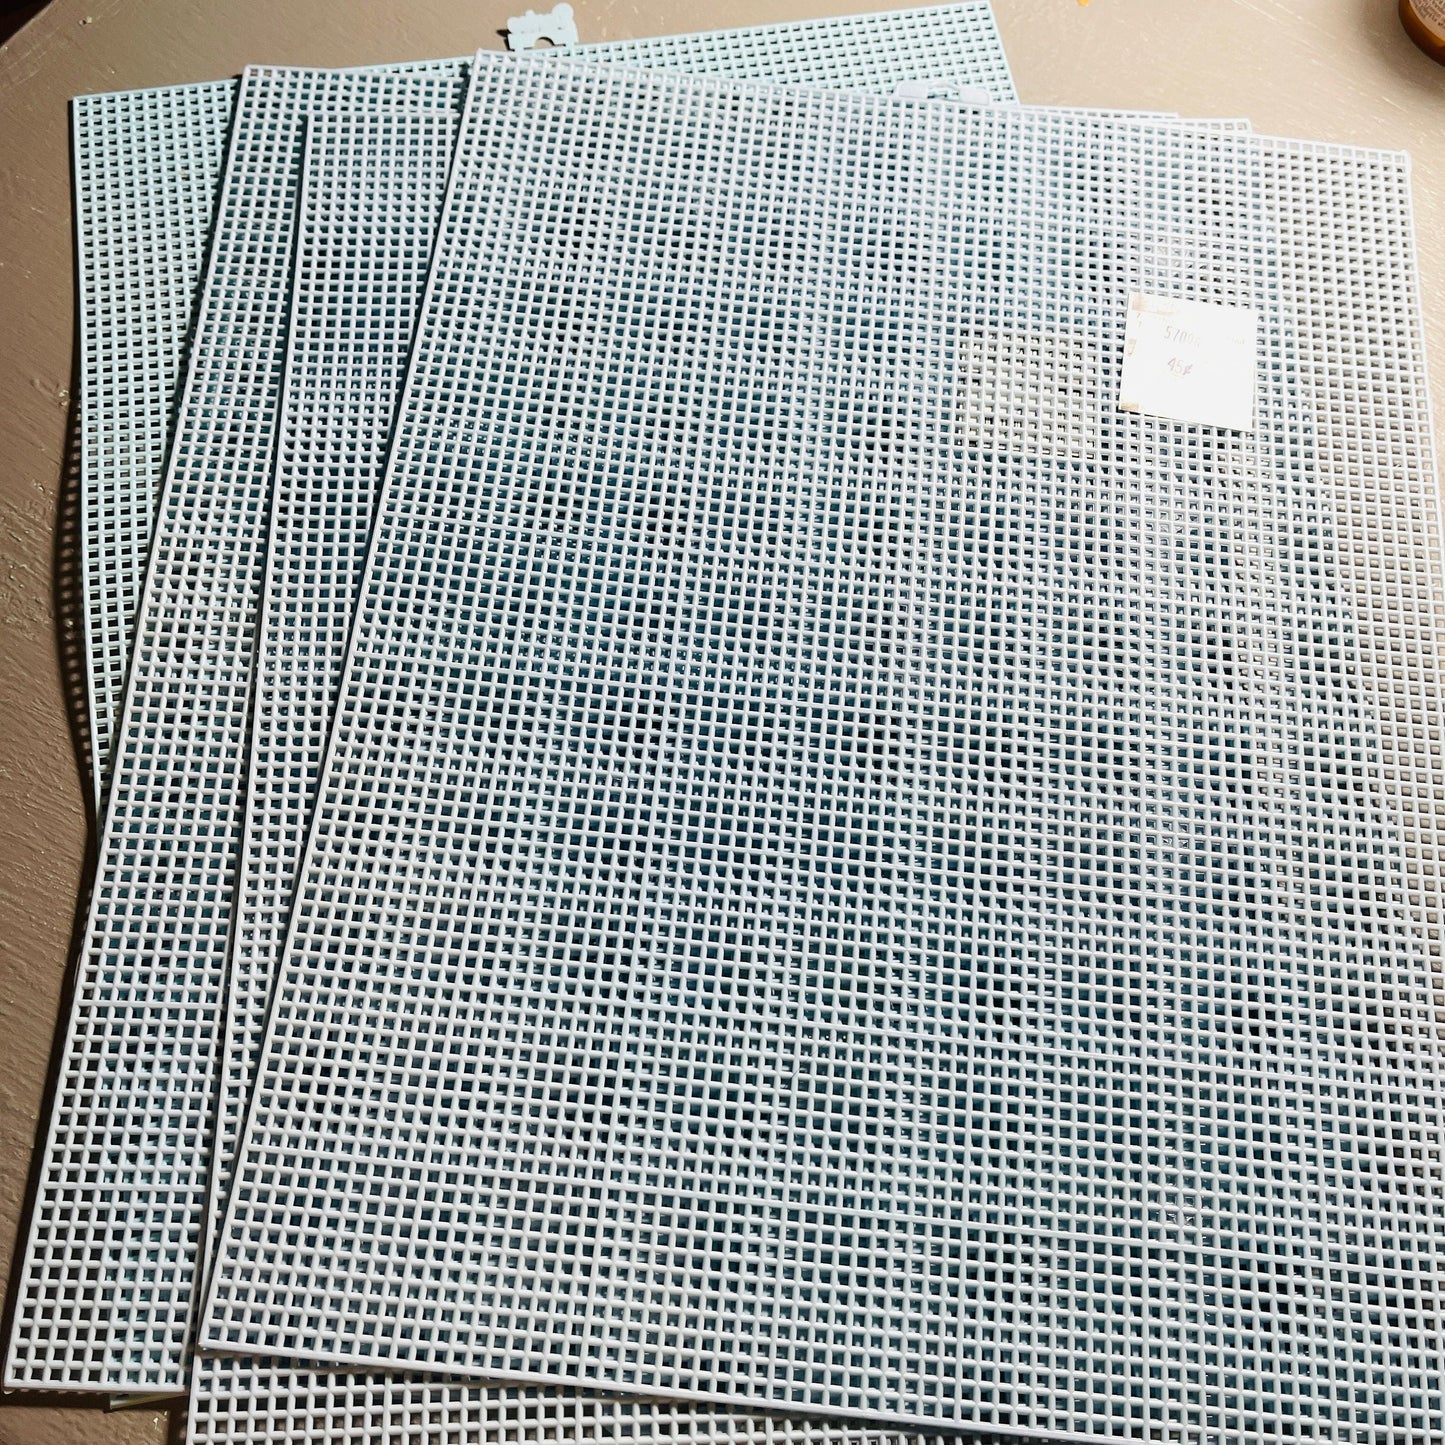 Plastic Canvas, 7 mesh, 10.5 by 13.5 Inch, Please See Variations